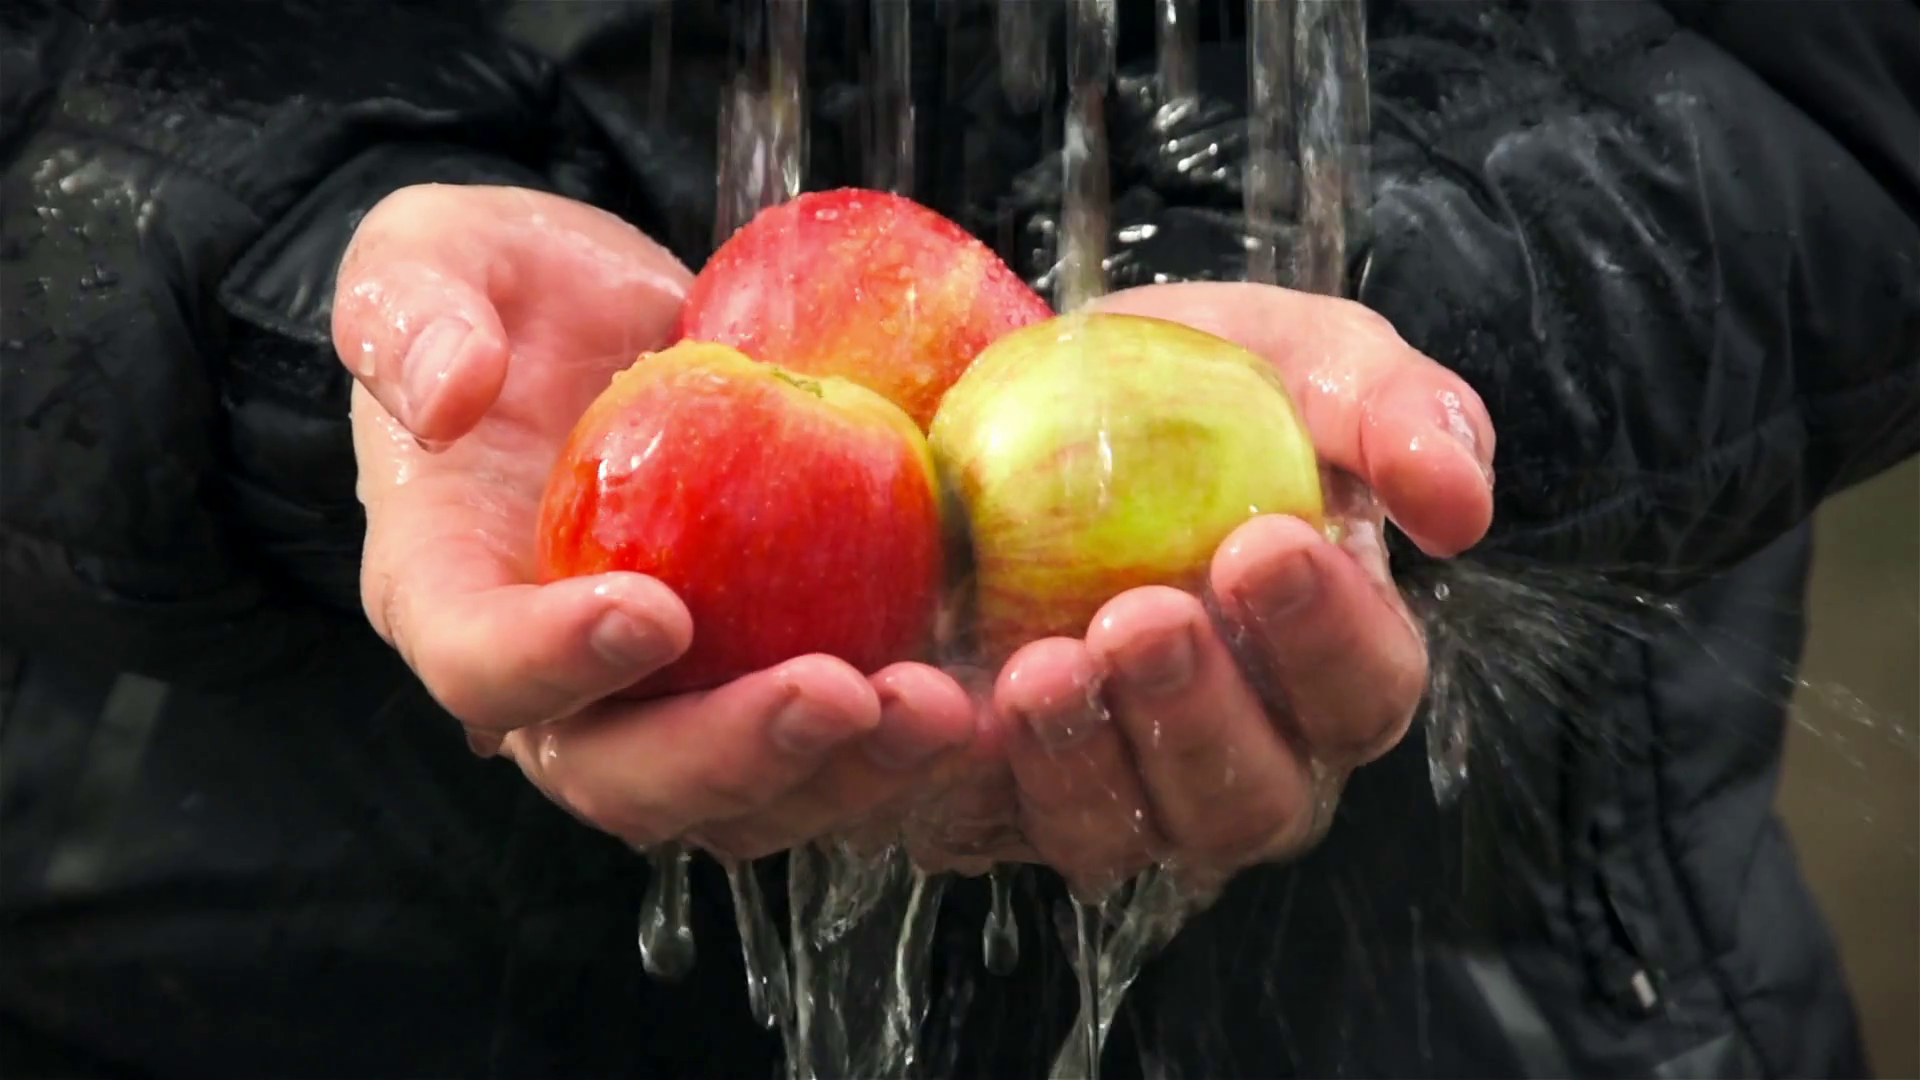 Water flows on fresh apples in hands of man. Vegetables and fruit in ...